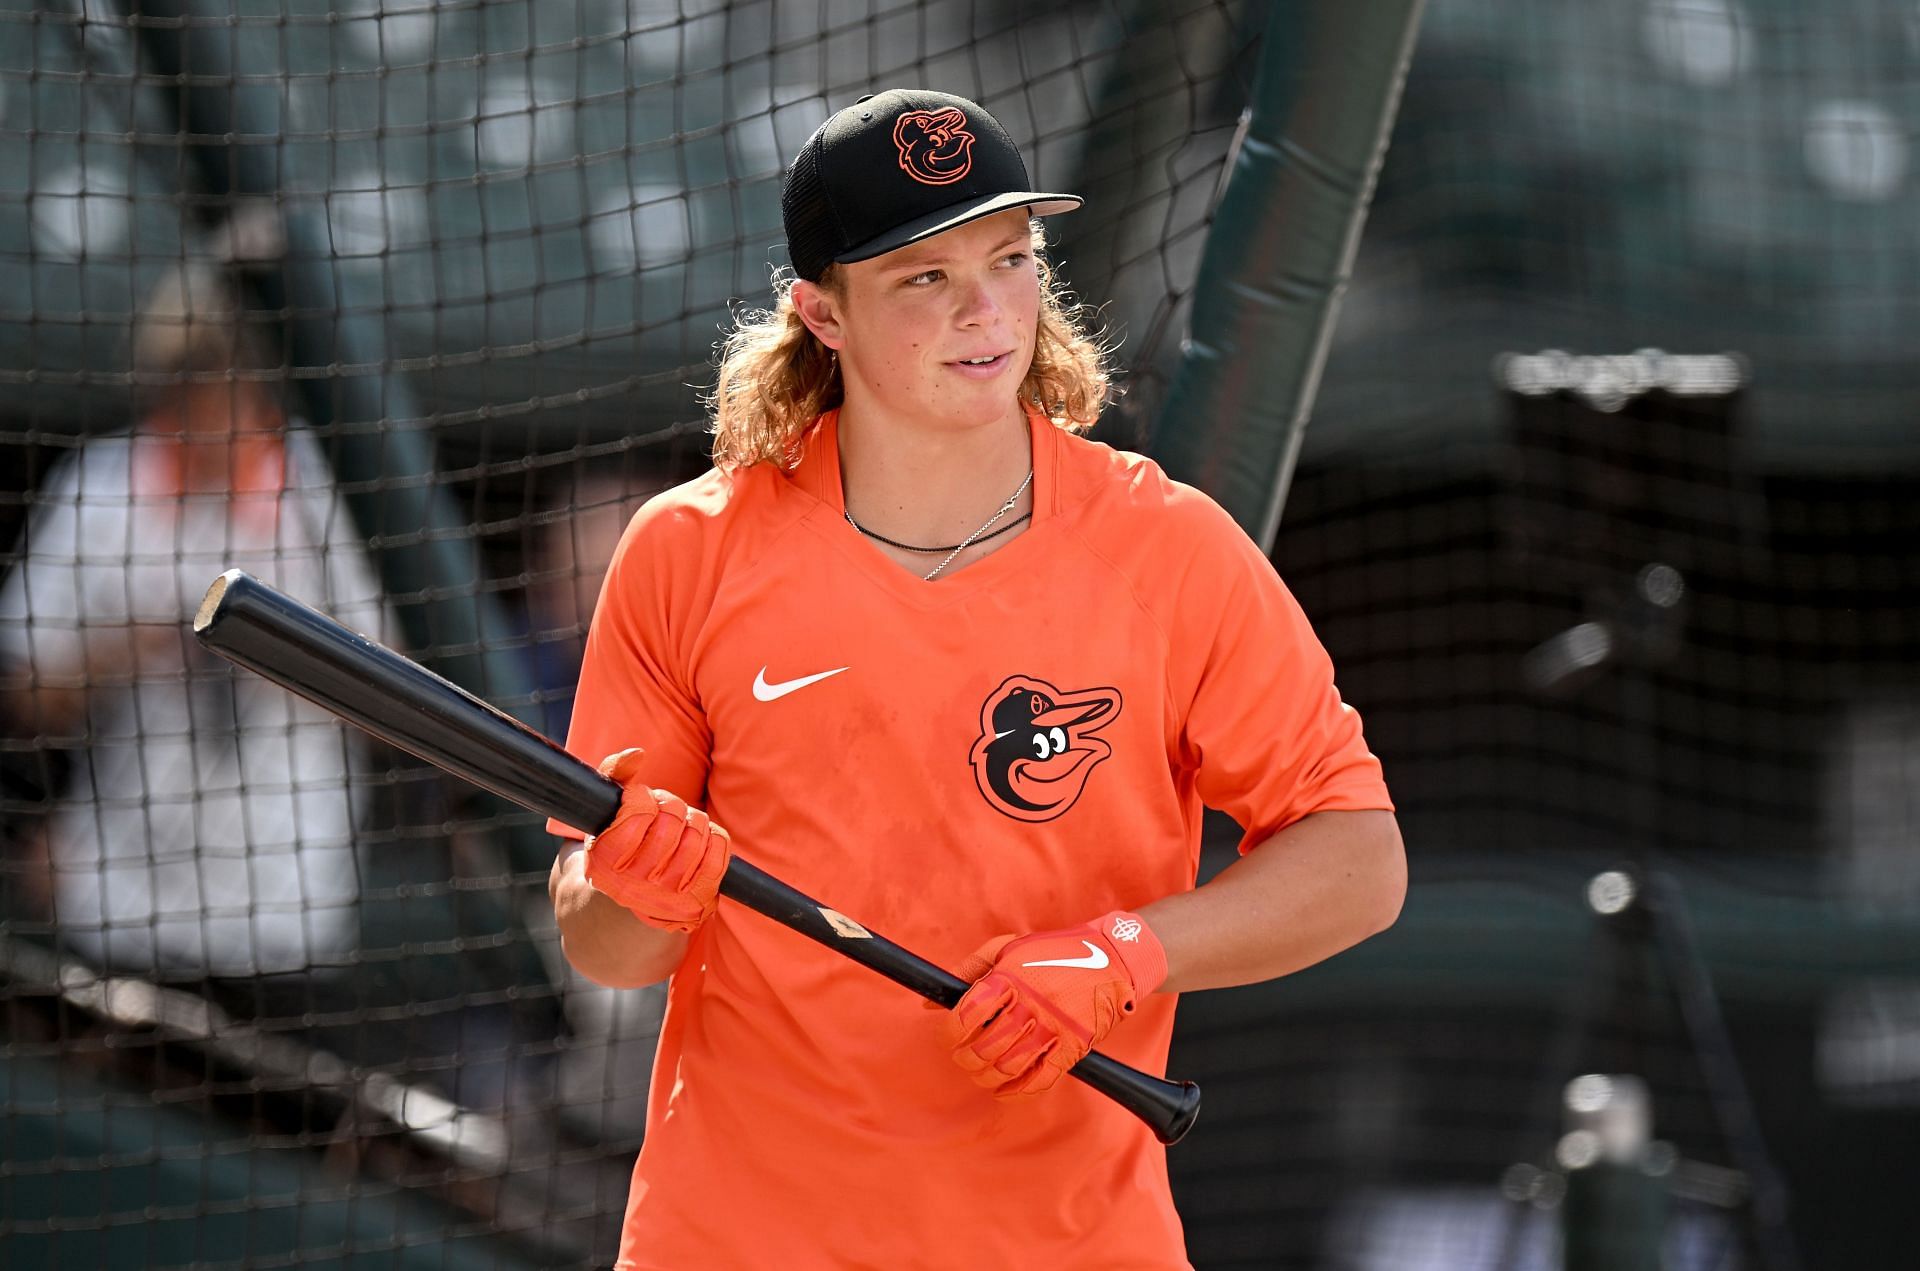 2022 Baltimore Orioles No. 1 overall selection of the 2022 First-Year Player Draft, Jackson Holliday, takes batting practice